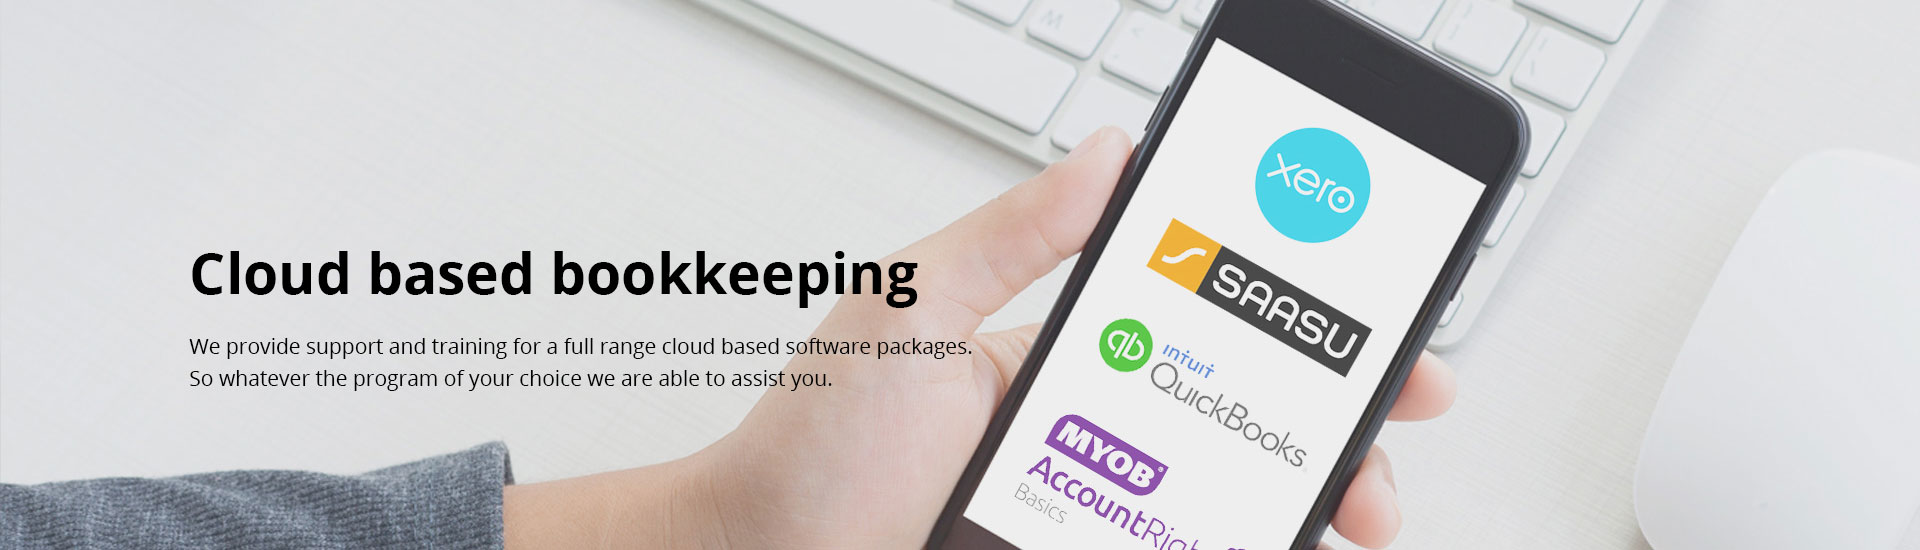 Cloud based bookkeeping. We provide support and training for a full range of cloud based software packages. So whatever the program of your choice we are able to assist you.